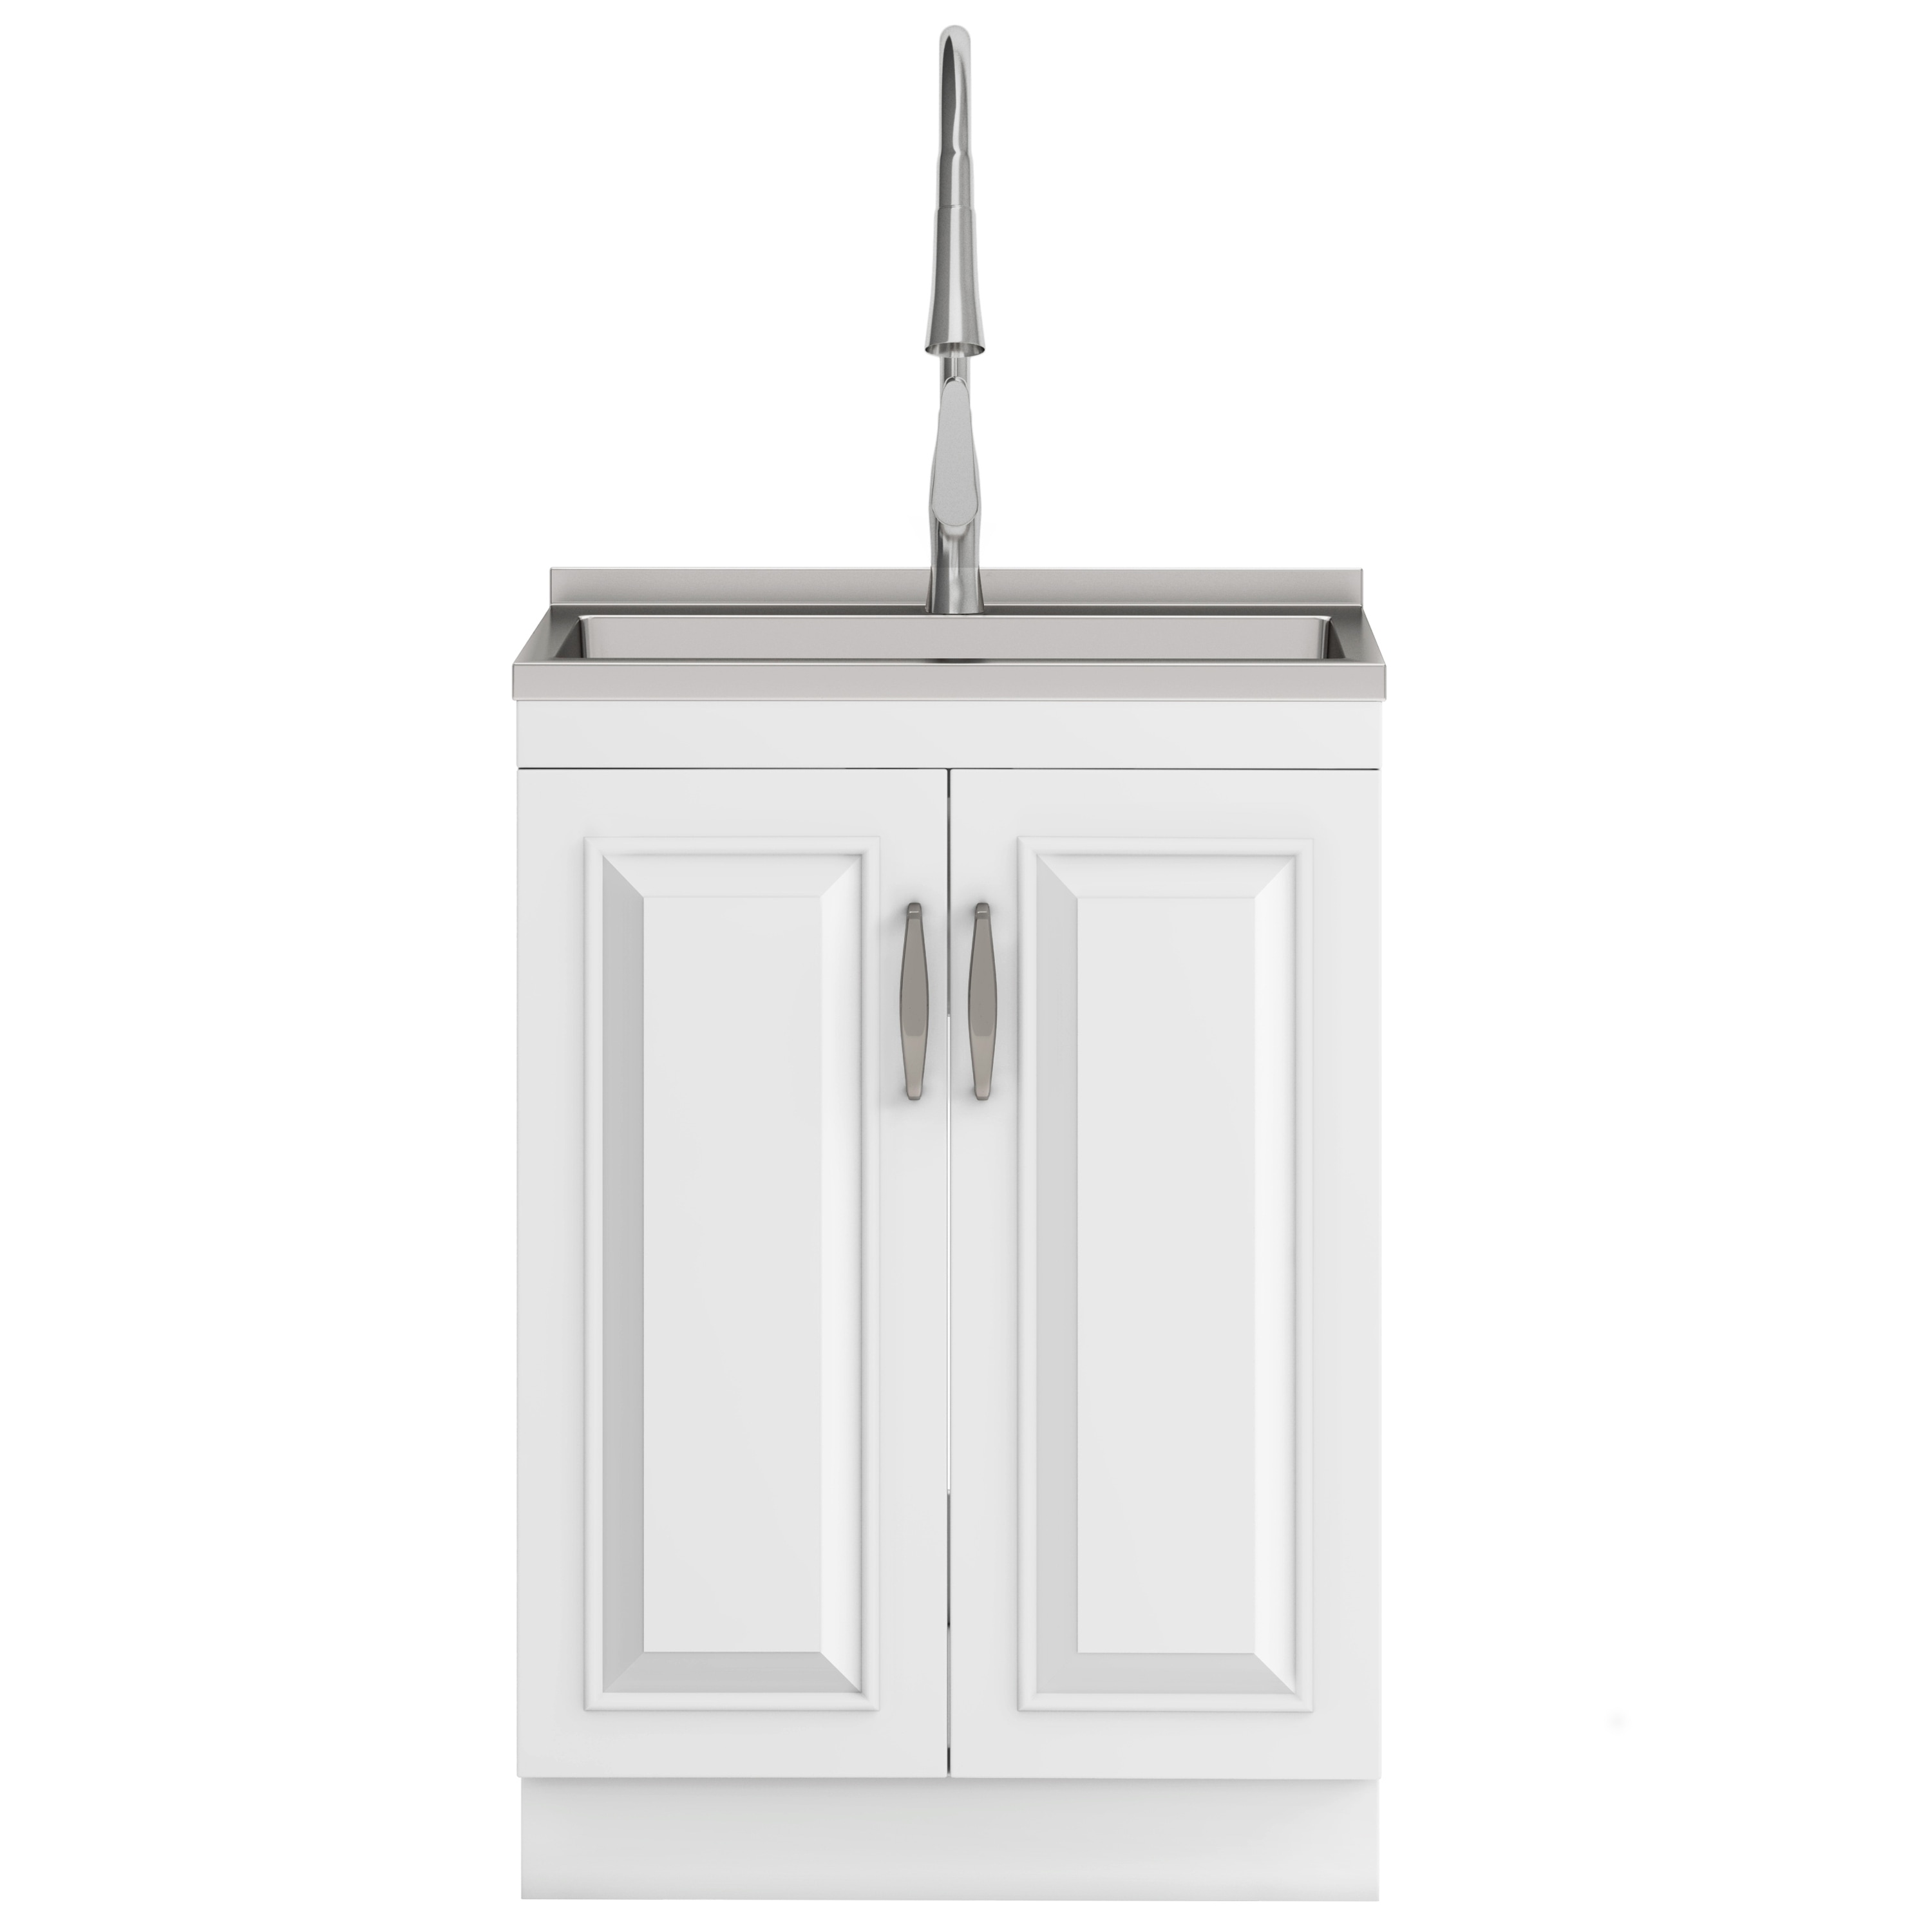 WYNDENHALL Bishop Laundry Cabinet with Faucet and Sink - On Sale - Bed Bath  & Beyond - 11915486